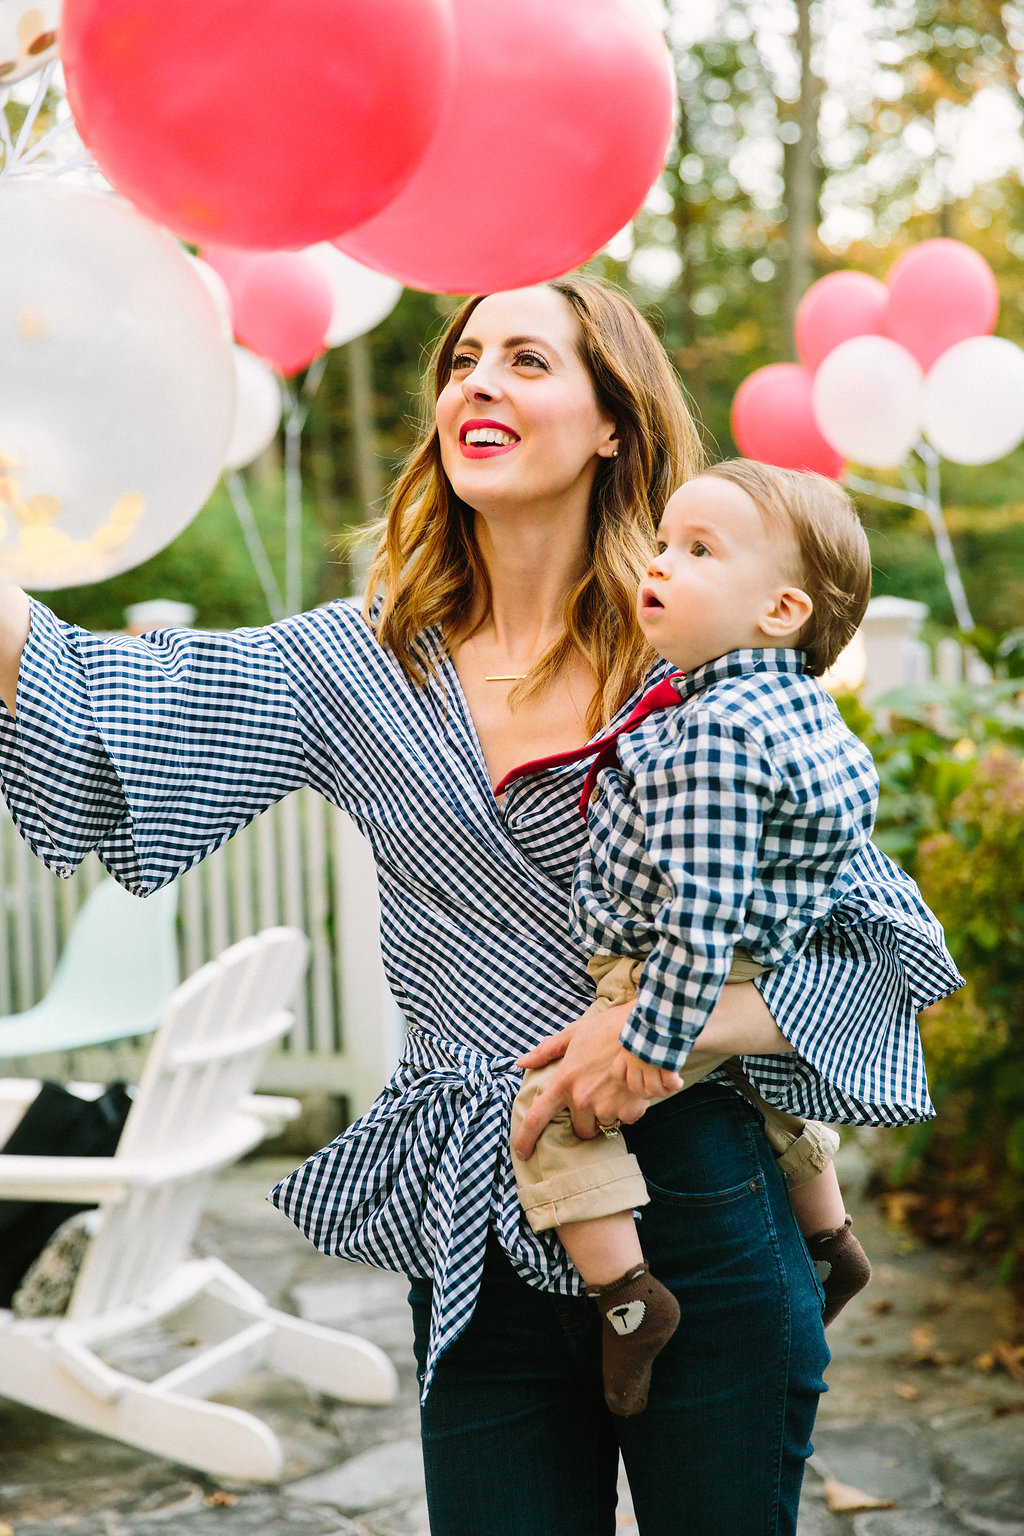 Eva Amurri Martino holds one year old son Major as they celebrate his first birthday with a teddy bear picnic themed party